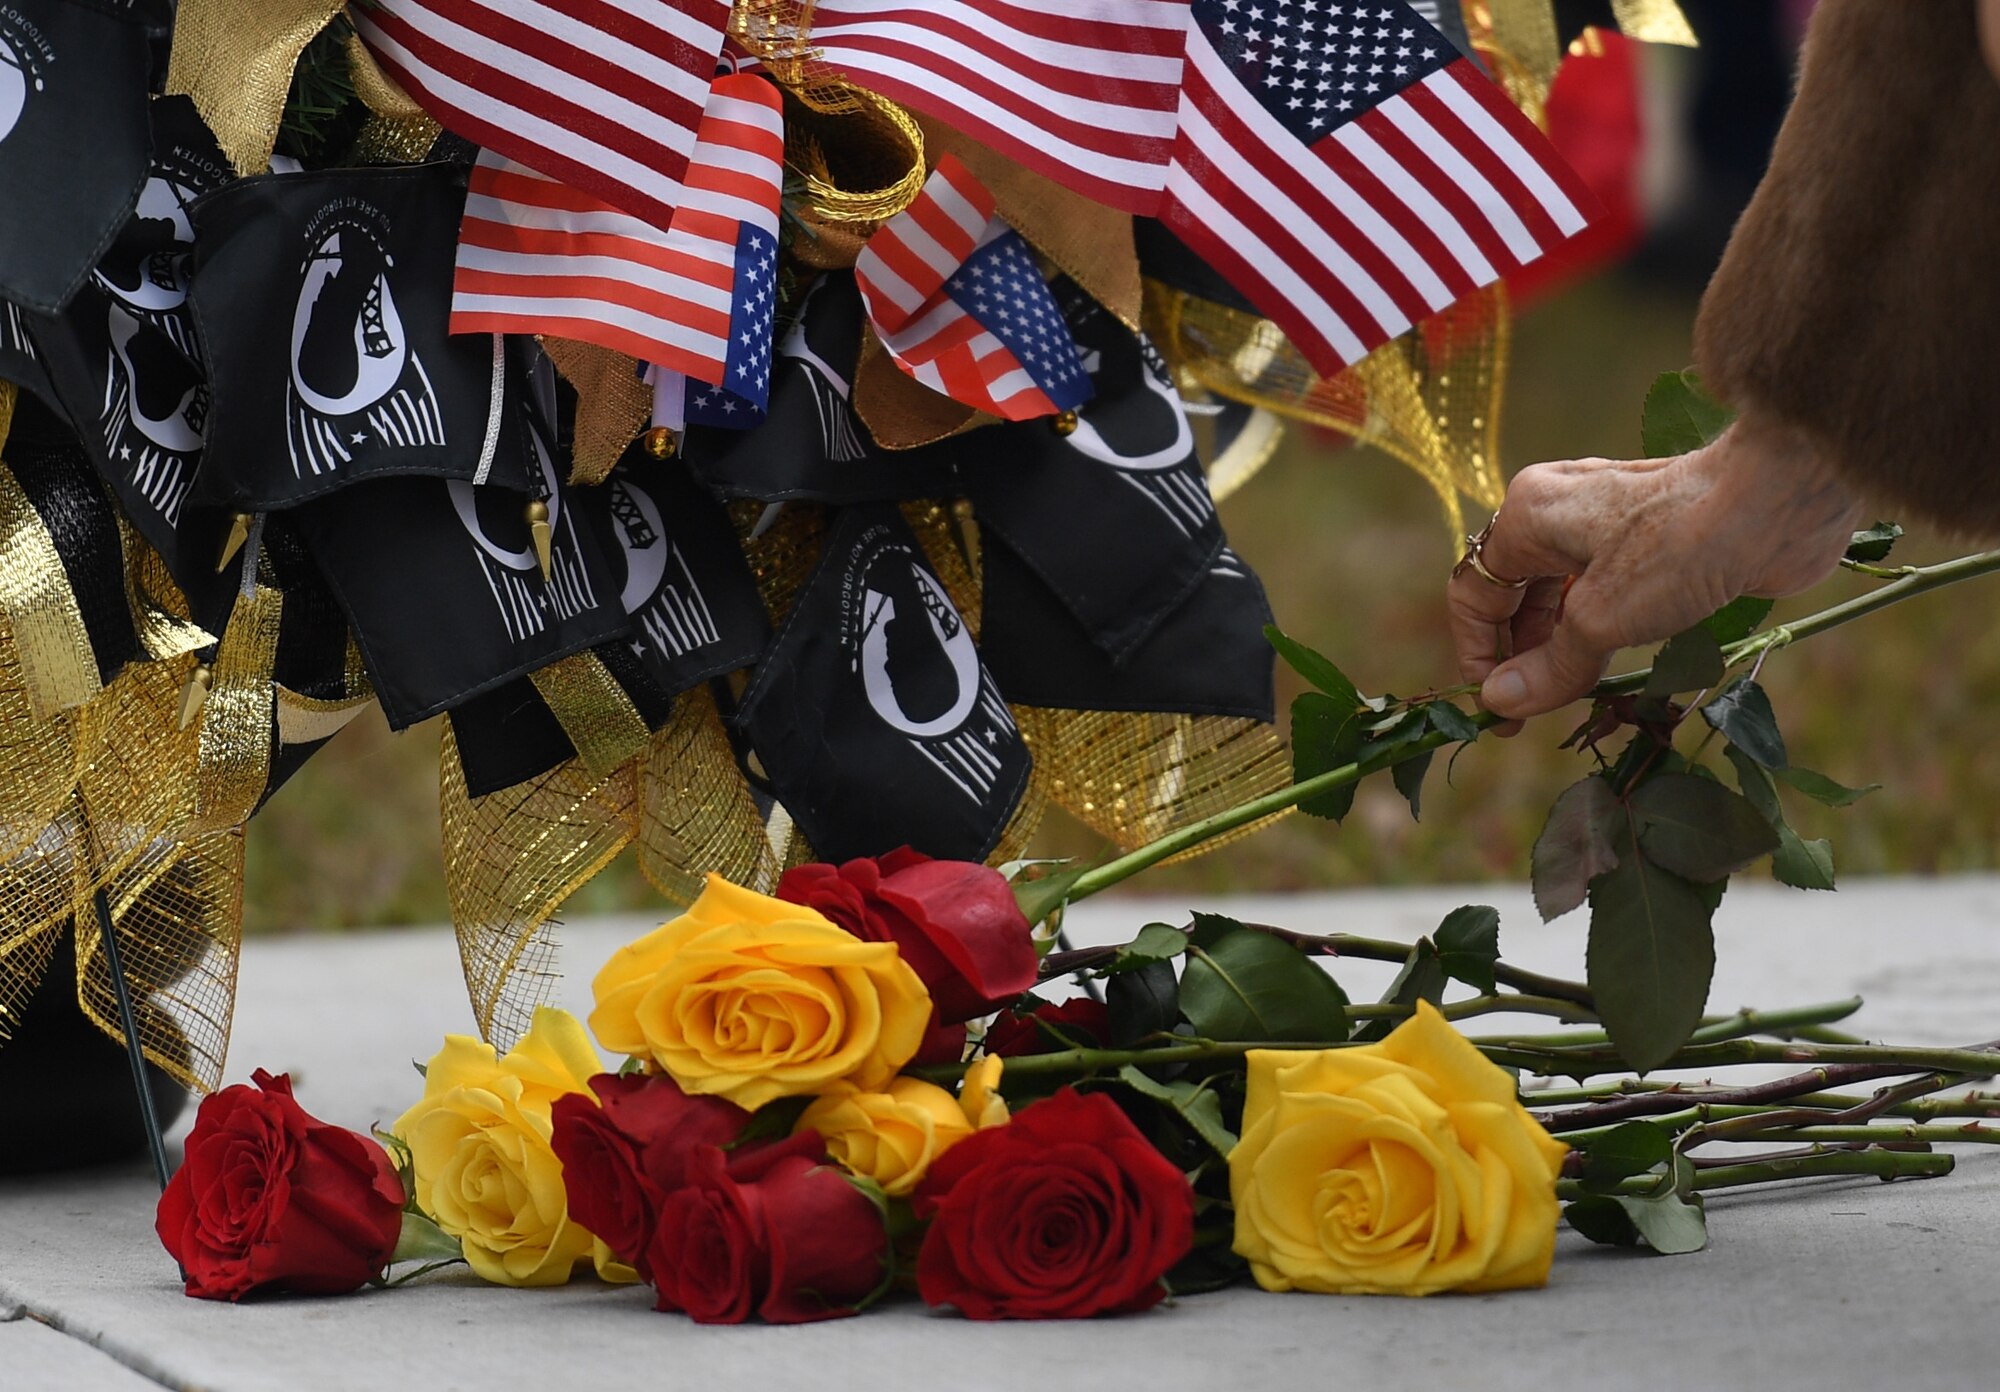 Gold Star family members place roses at the base of a wreath during the Gold Star Families Memorial Monument dedication ceremony at Guice Veterans Memorial Park in Biloxi, Mississippi, Nov. 23, 2019. The monument honors families of service men and women who sacrificed their lives while serving in the military. (U.S. Air Force photo by Kemberly Groue)